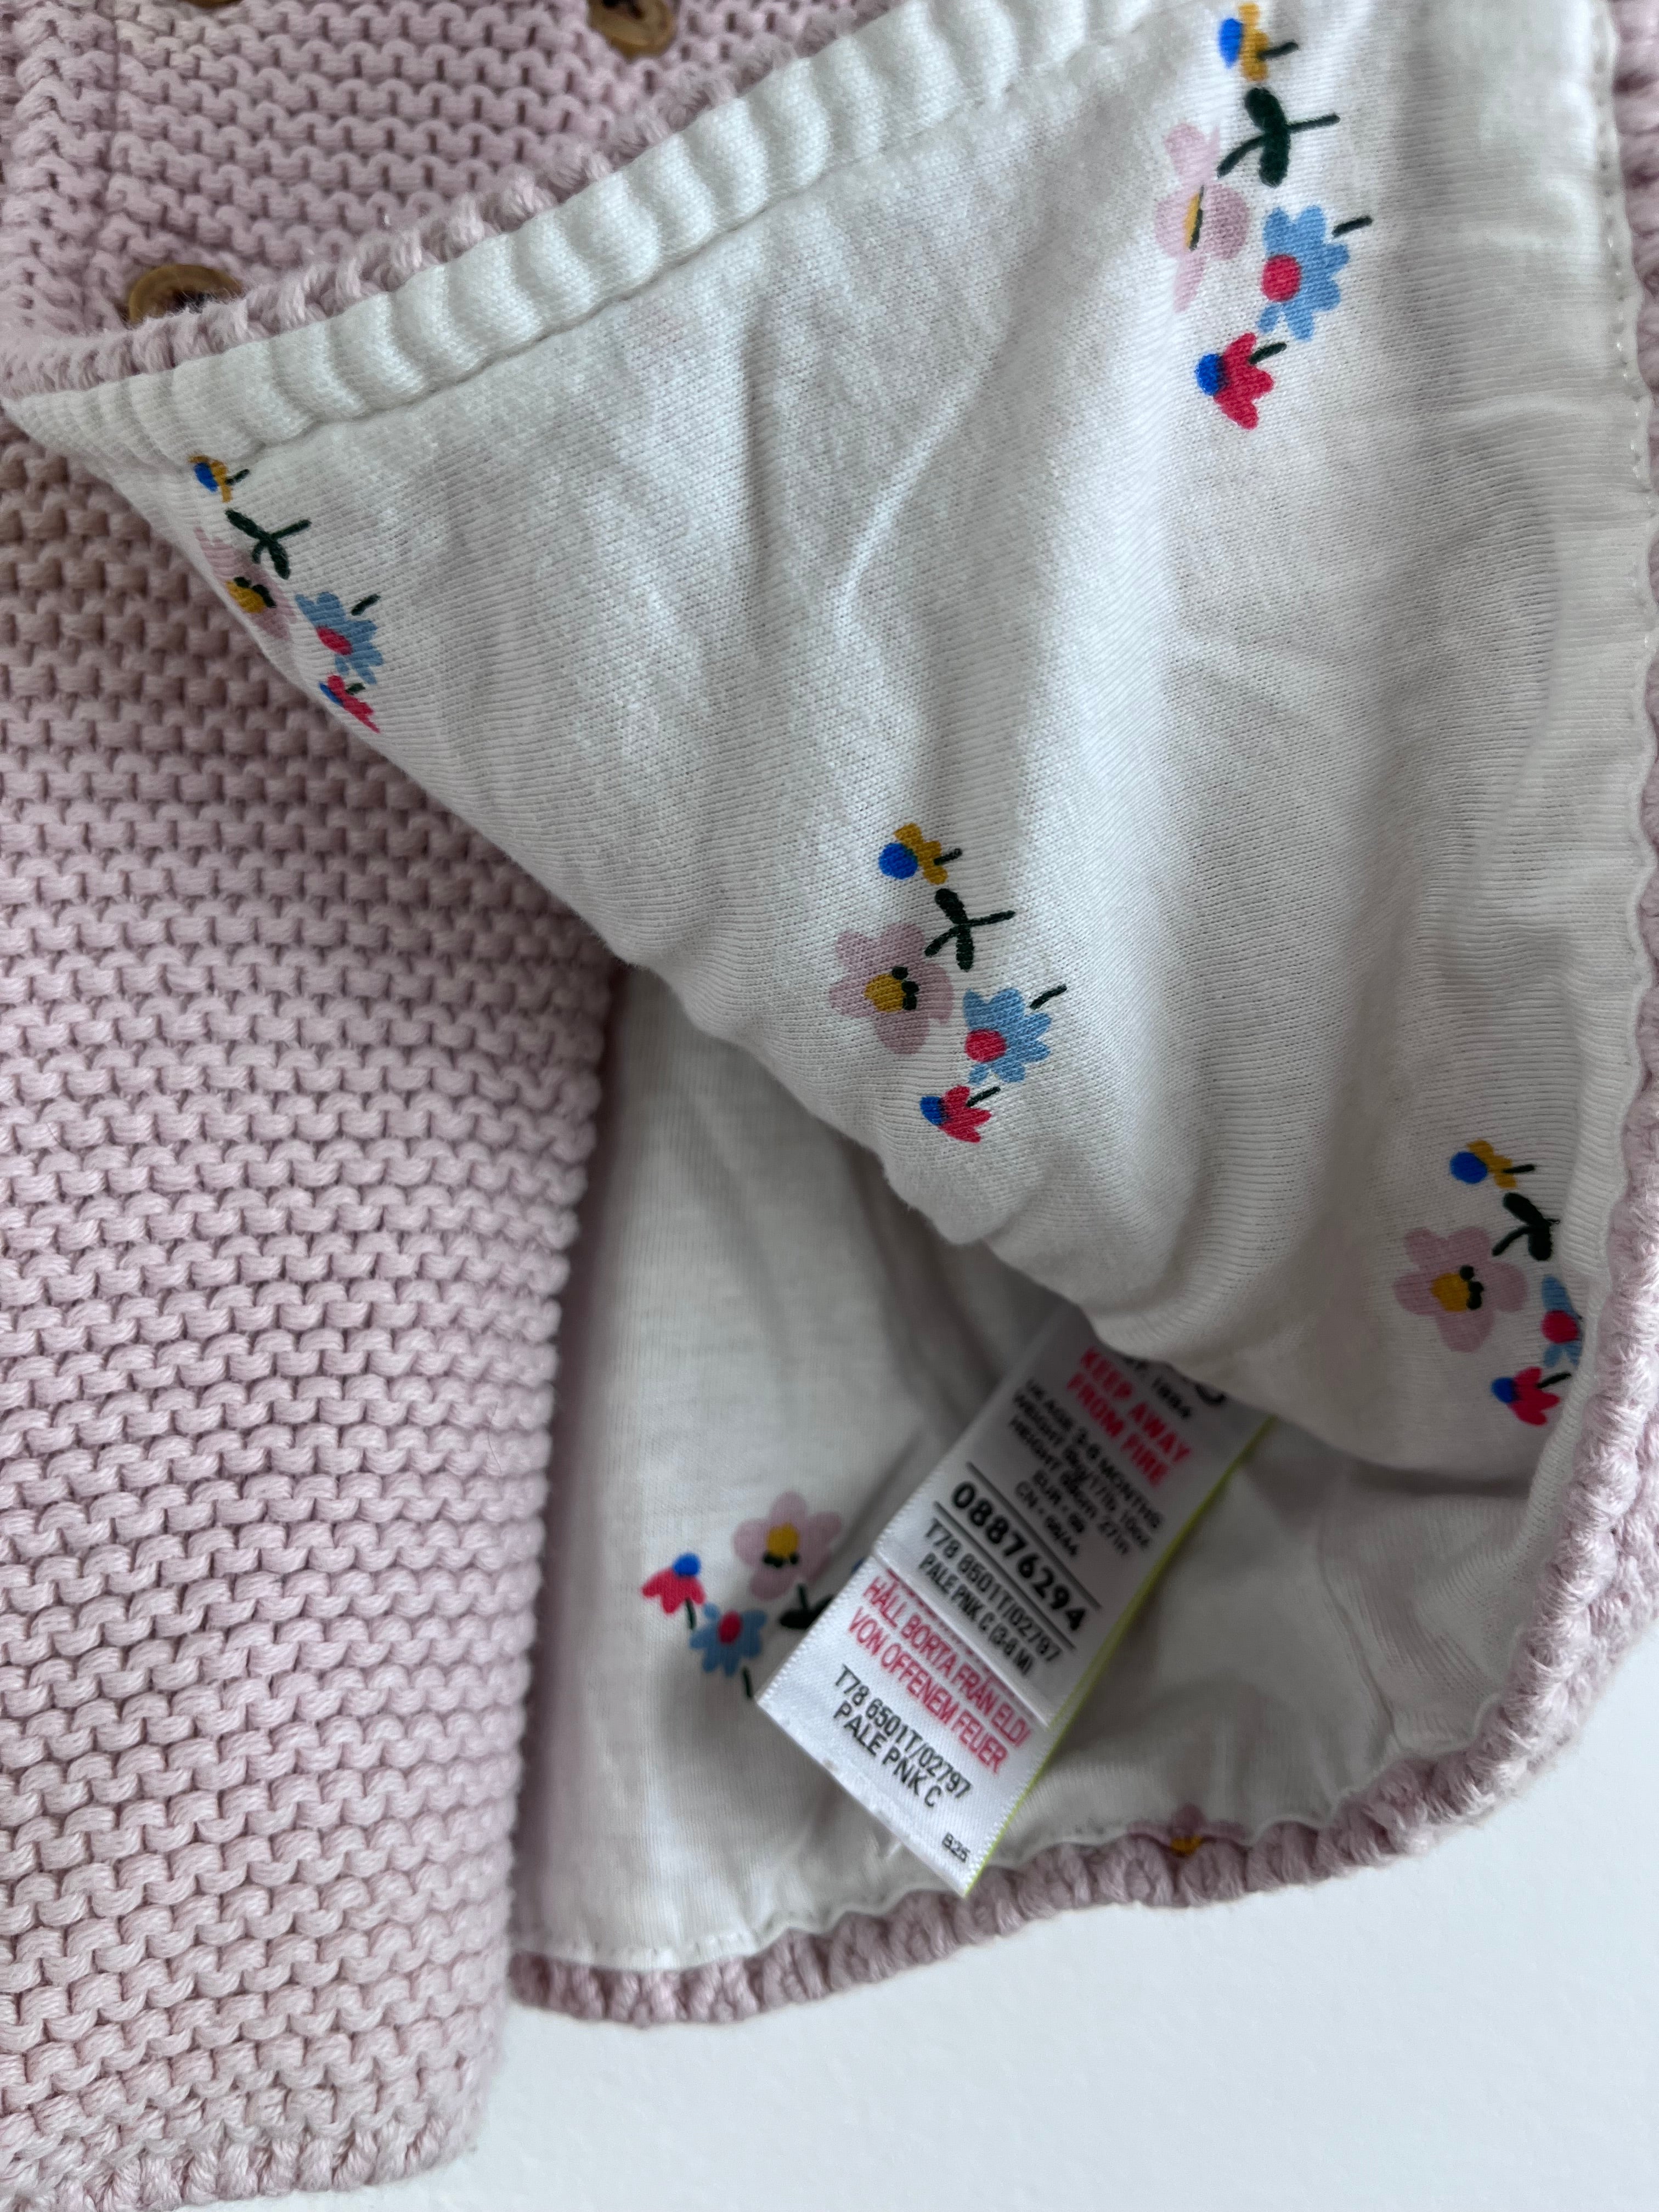 M&S 3-6 Months-Jackets-Second Snuggle Preloved